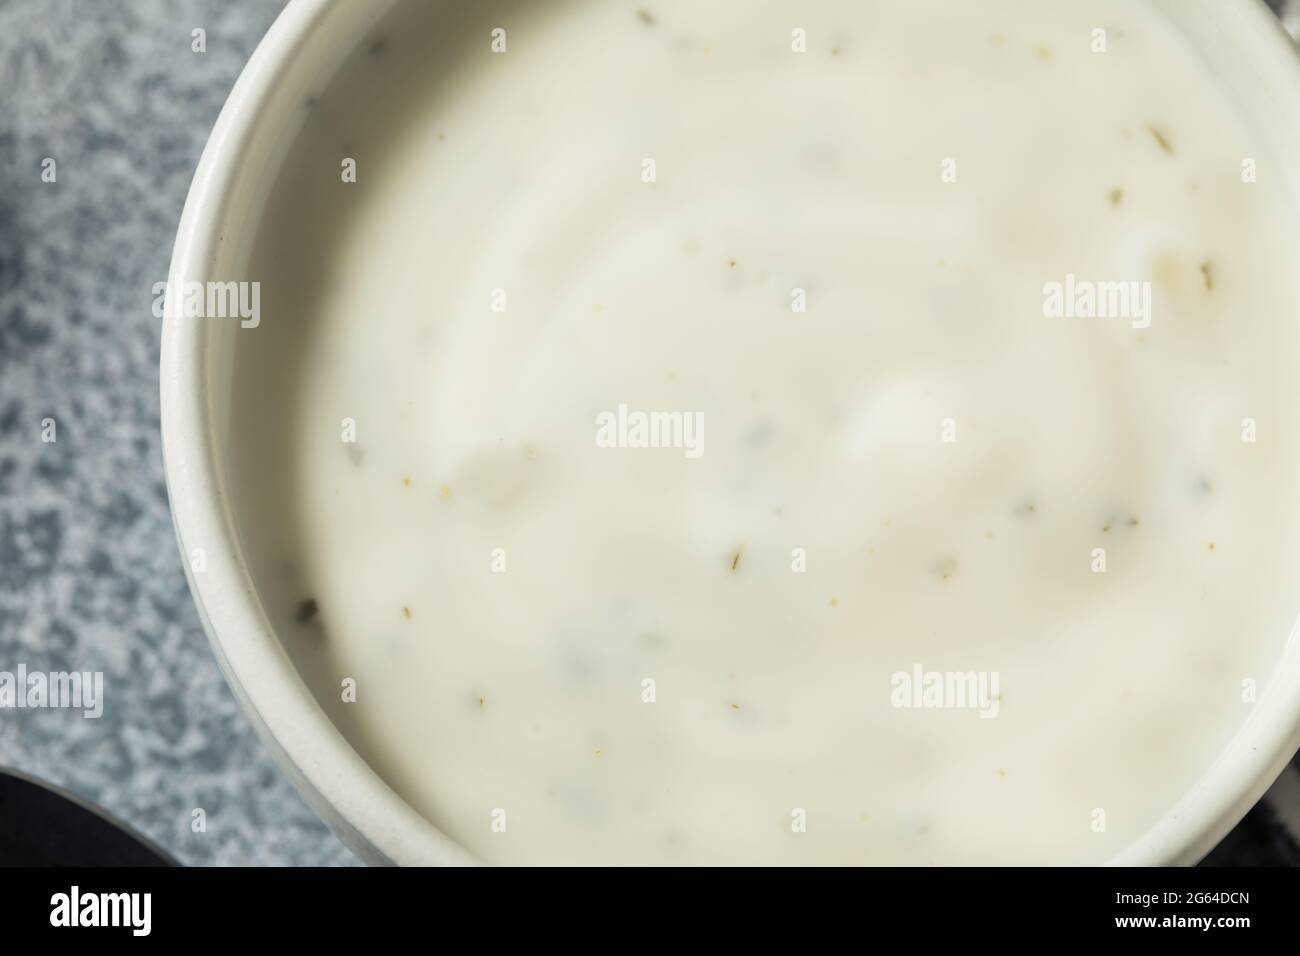 Homemade Organic Ranch Dressing in a Bowl Stock Photo